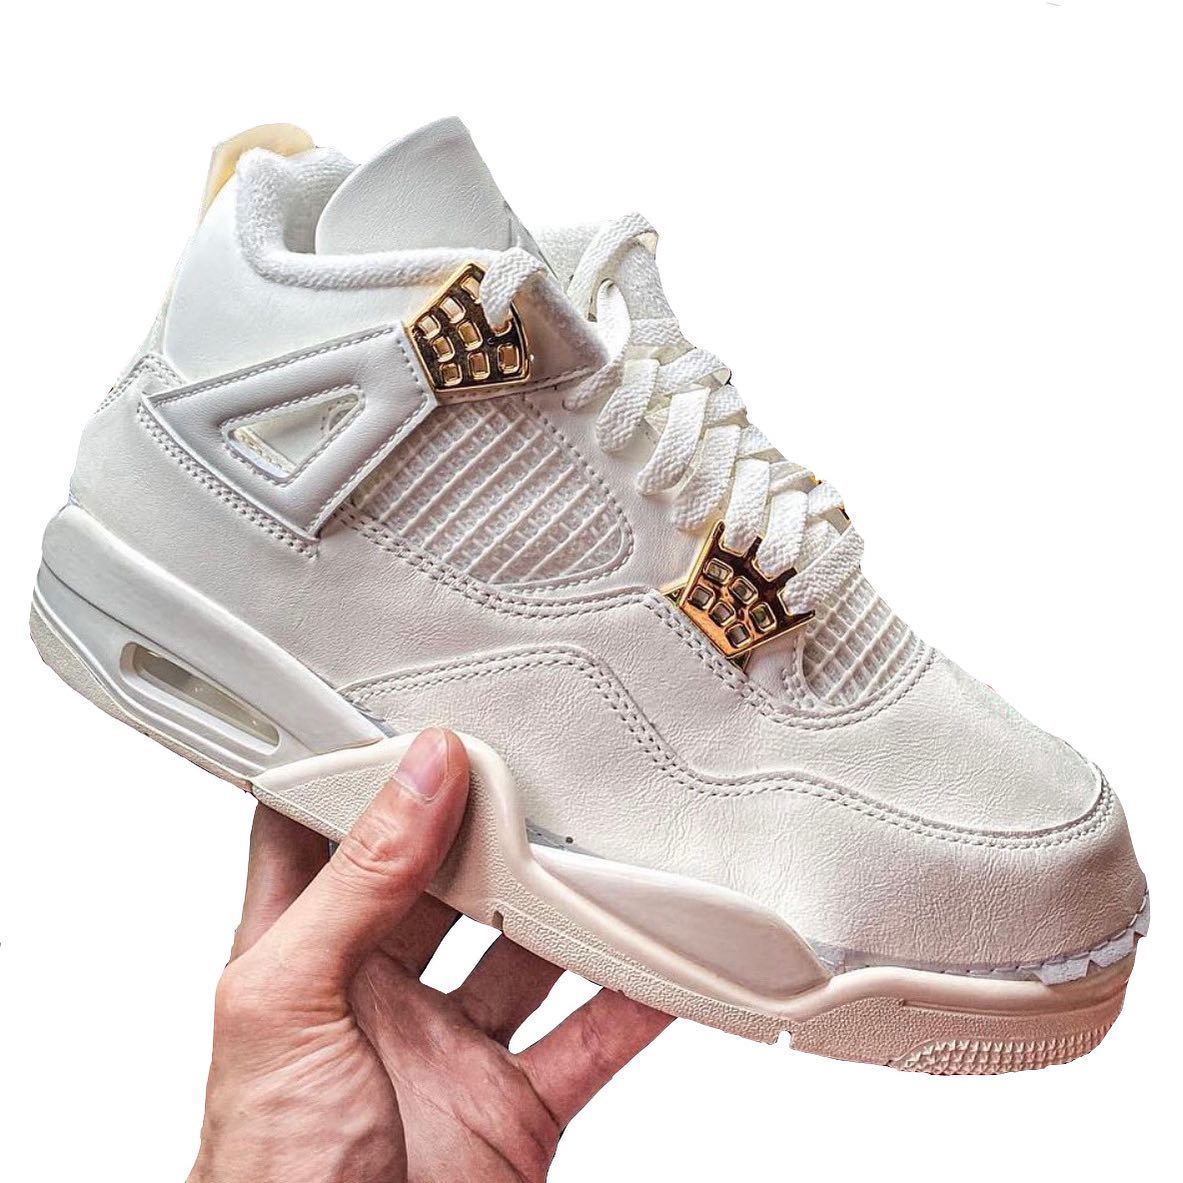 A New (Gilded) Air Jordan 4 Sail Releases Spring 2024